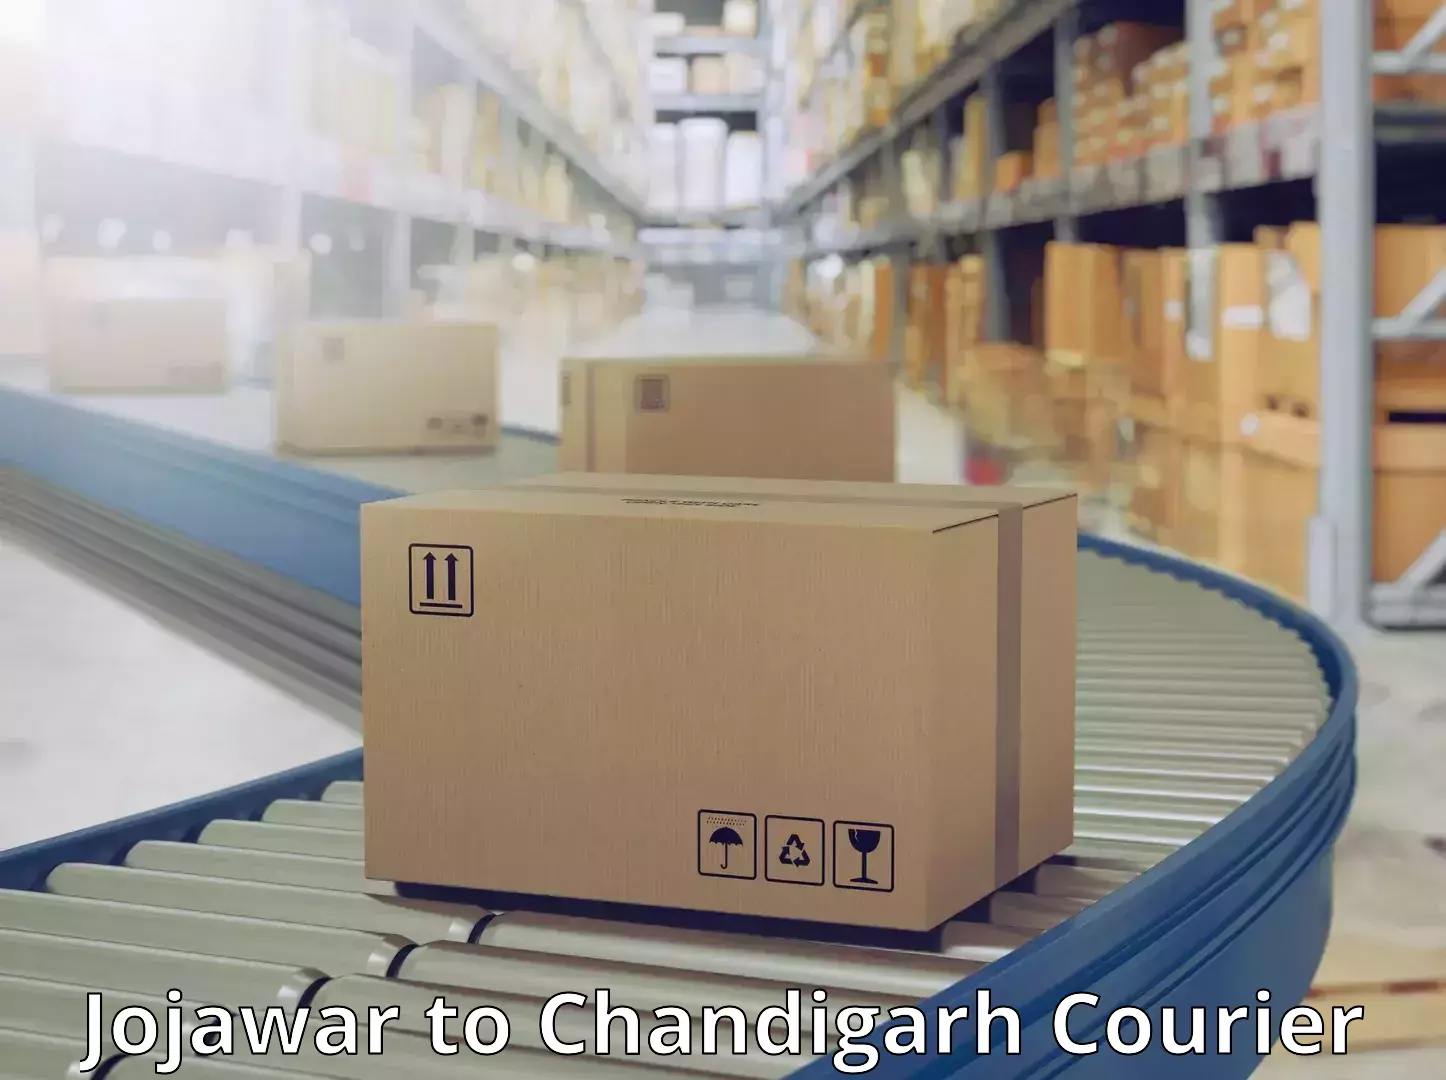 State-of-the-art courier technology Jojawar to Chandigarh